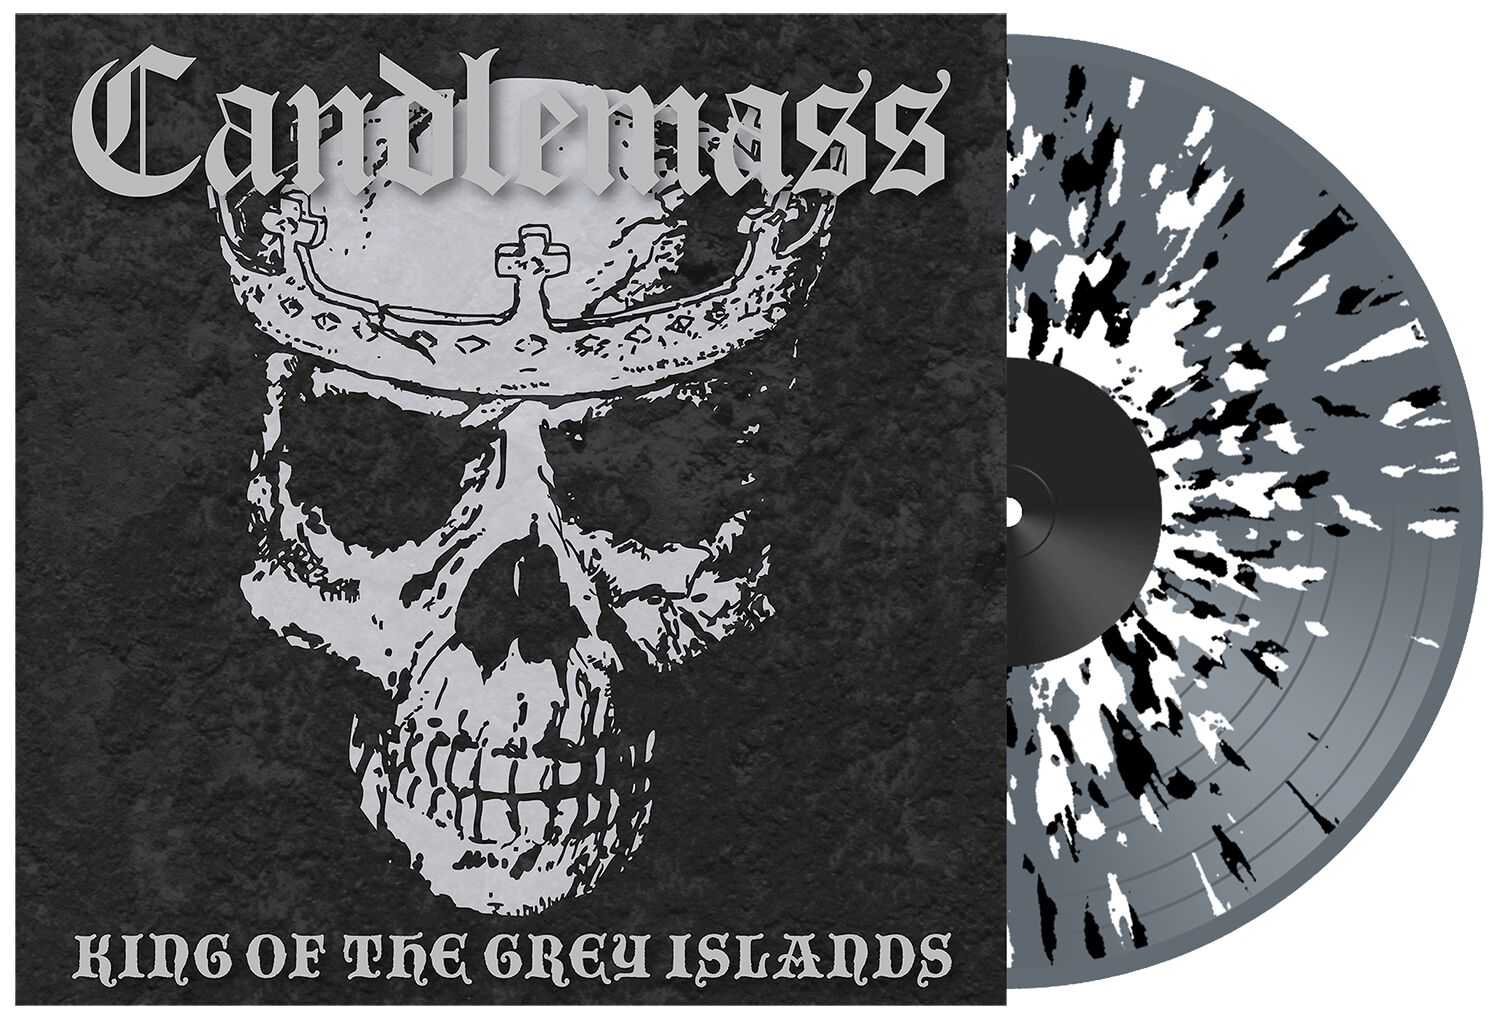 Image of Candlemass King of the grey islands 2-LP splattered